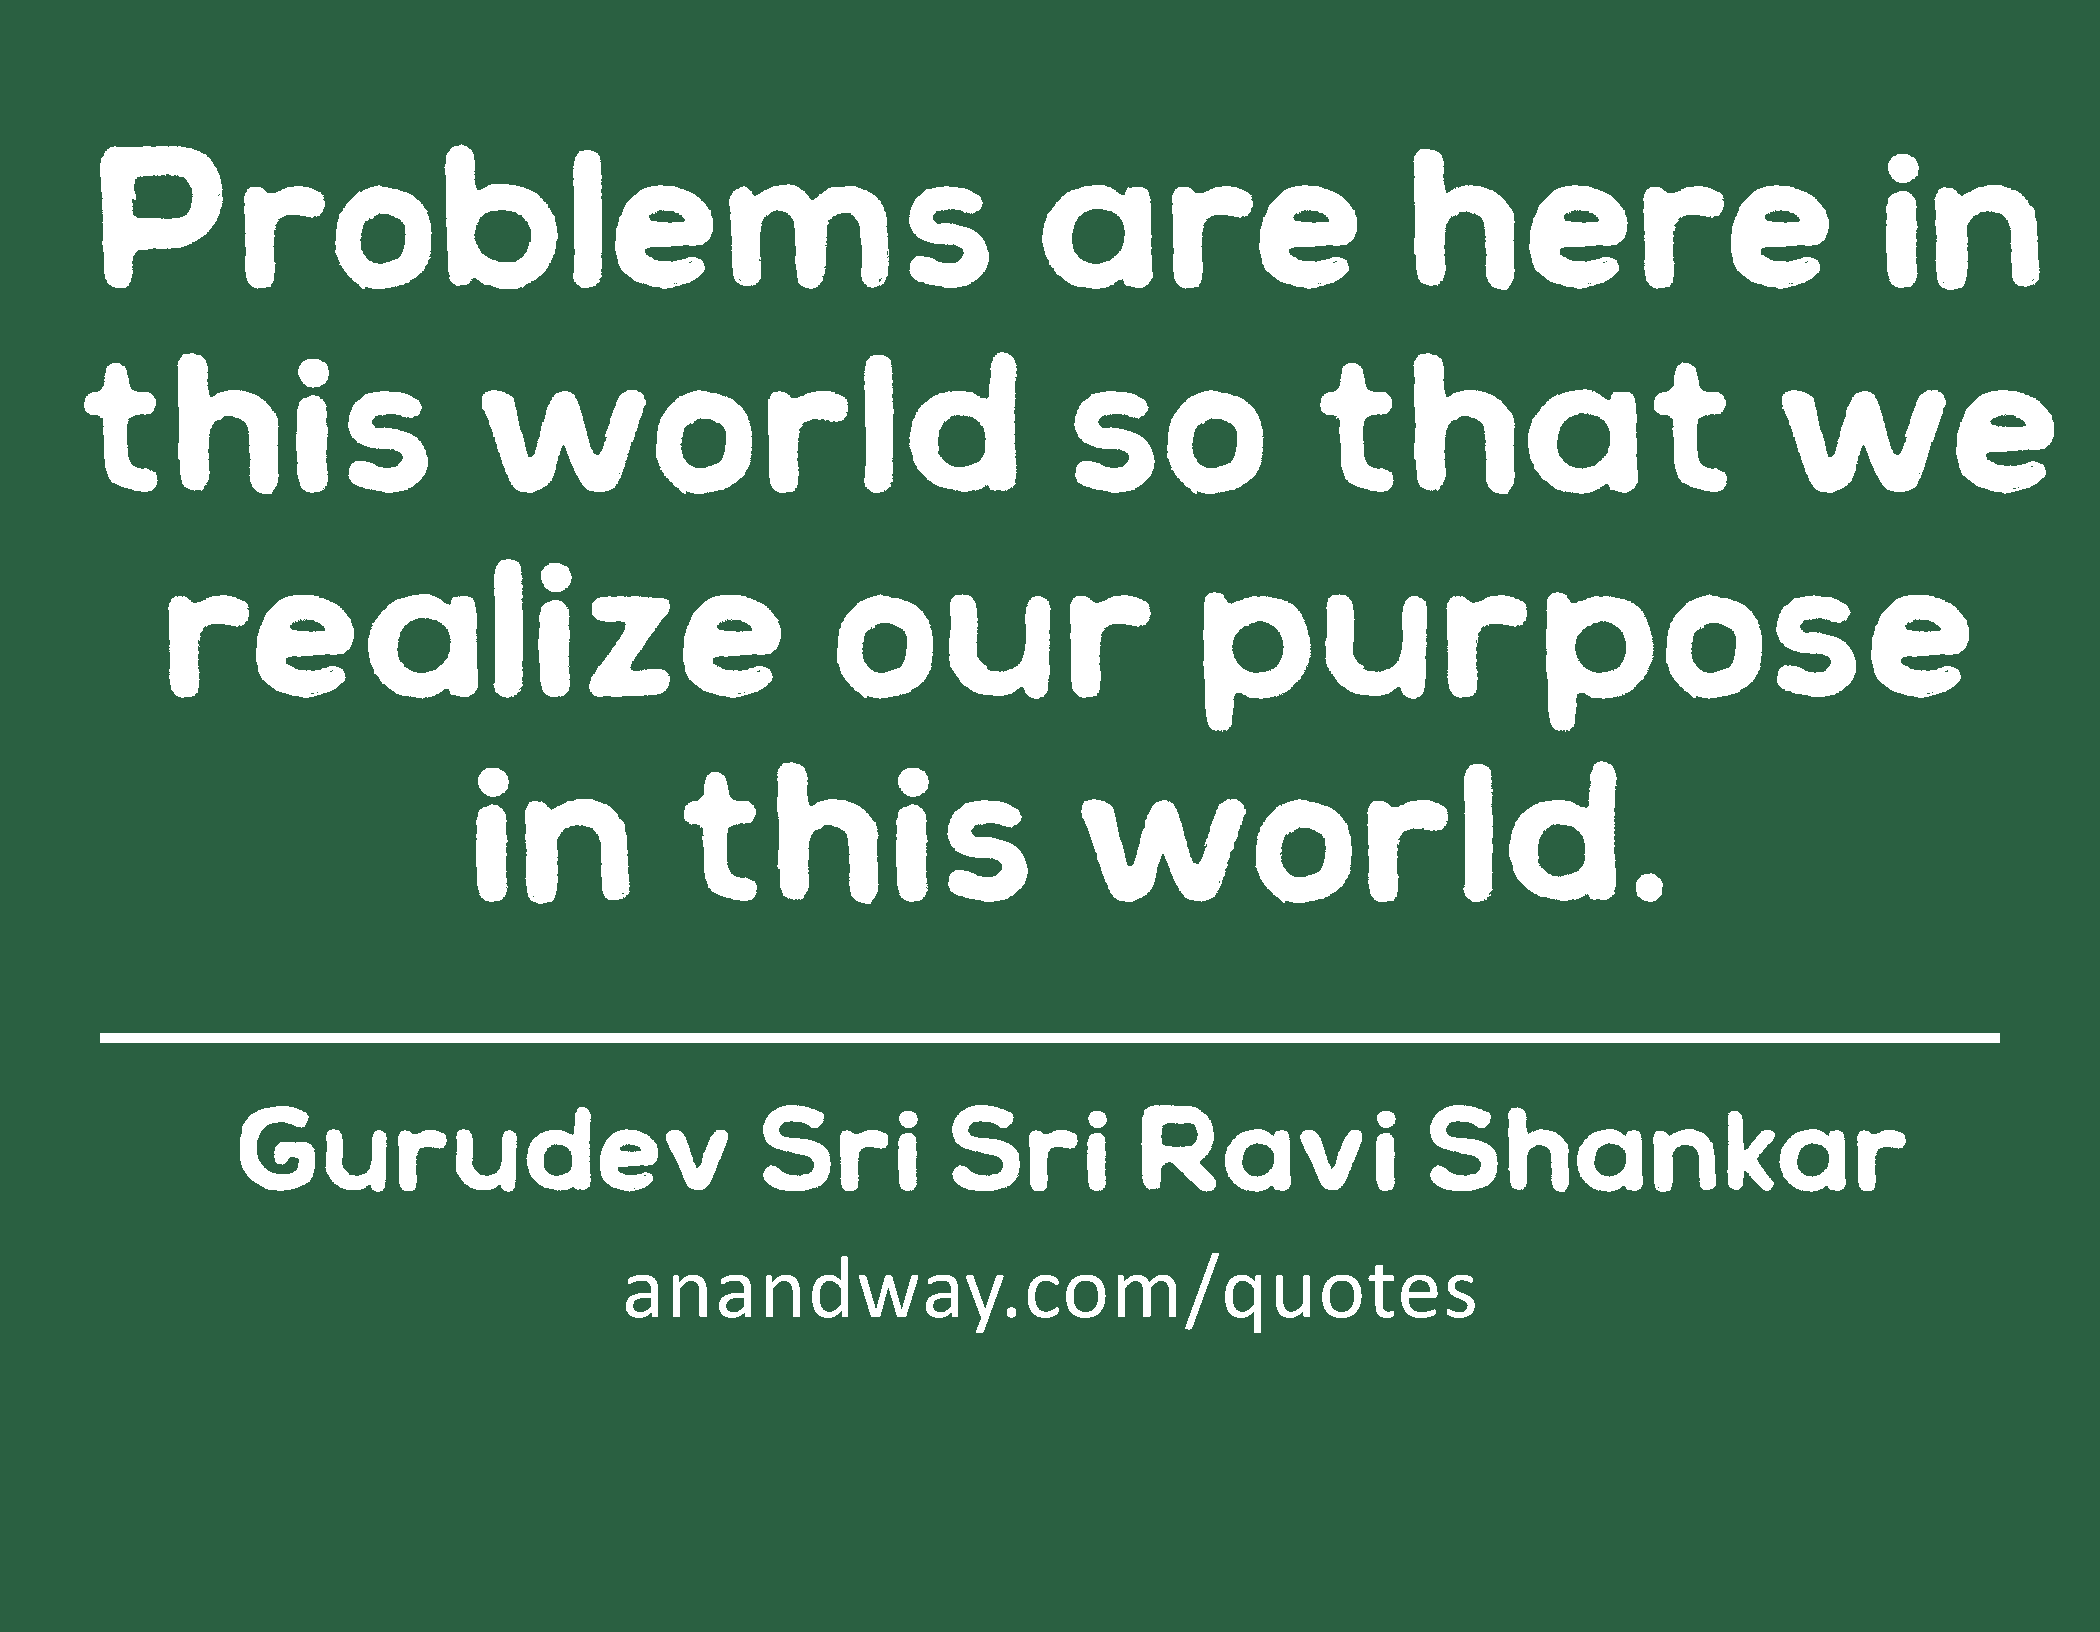 Problems are here in this world so that we realize our purpose in this world. 
 -Gurudev Sri Sri Ravi Shankar